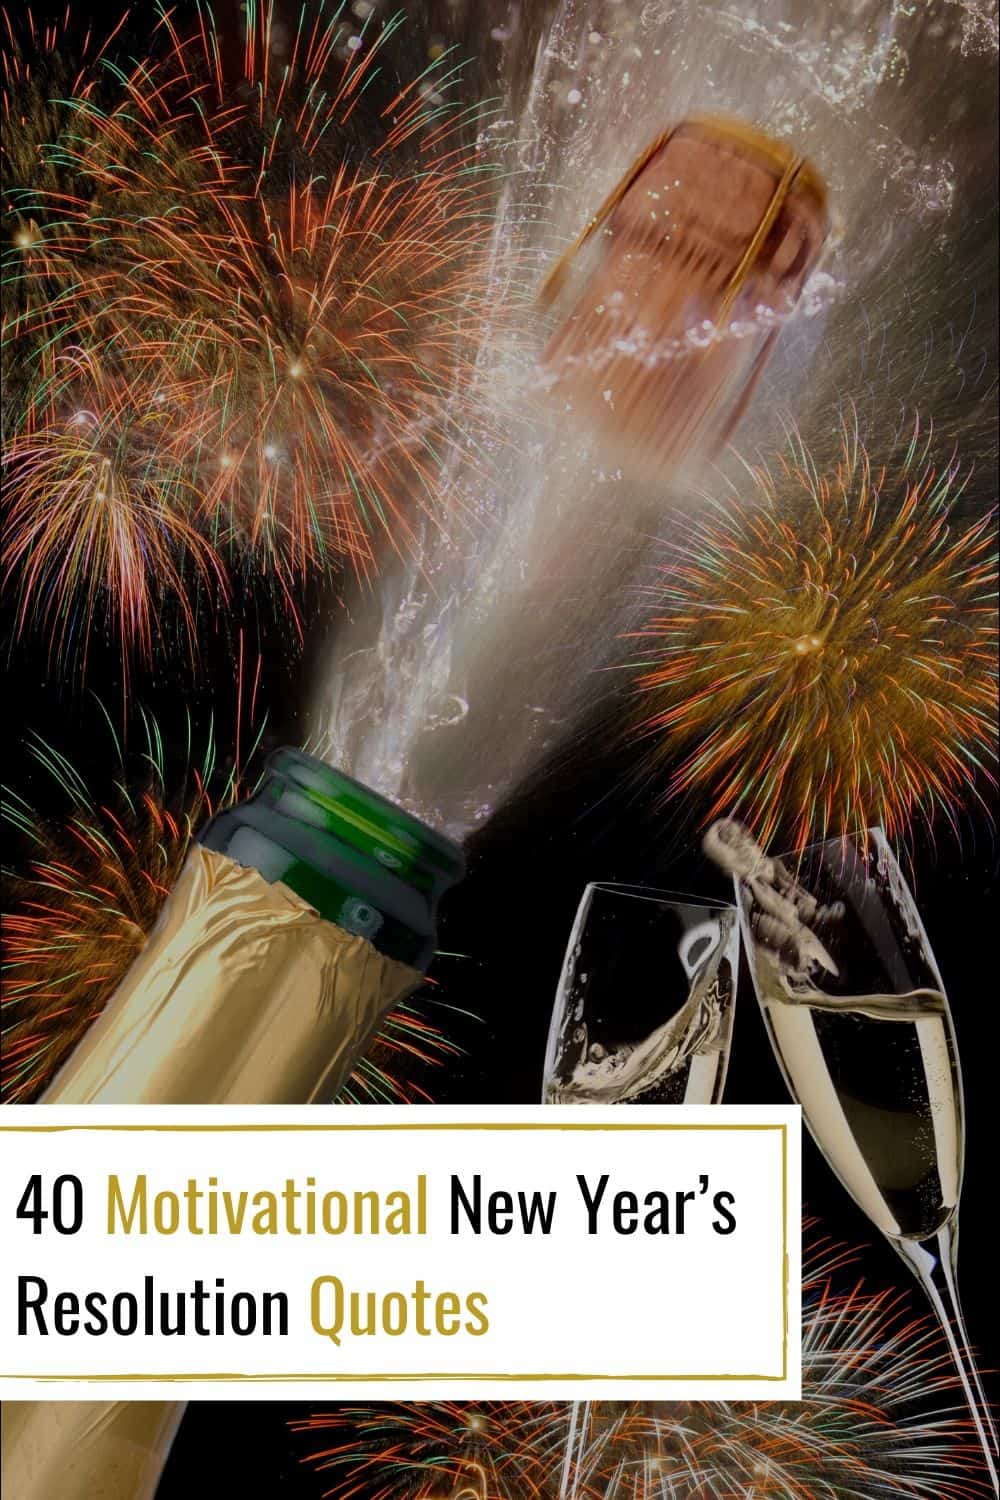 Motivational New Year's Resolution Quotes